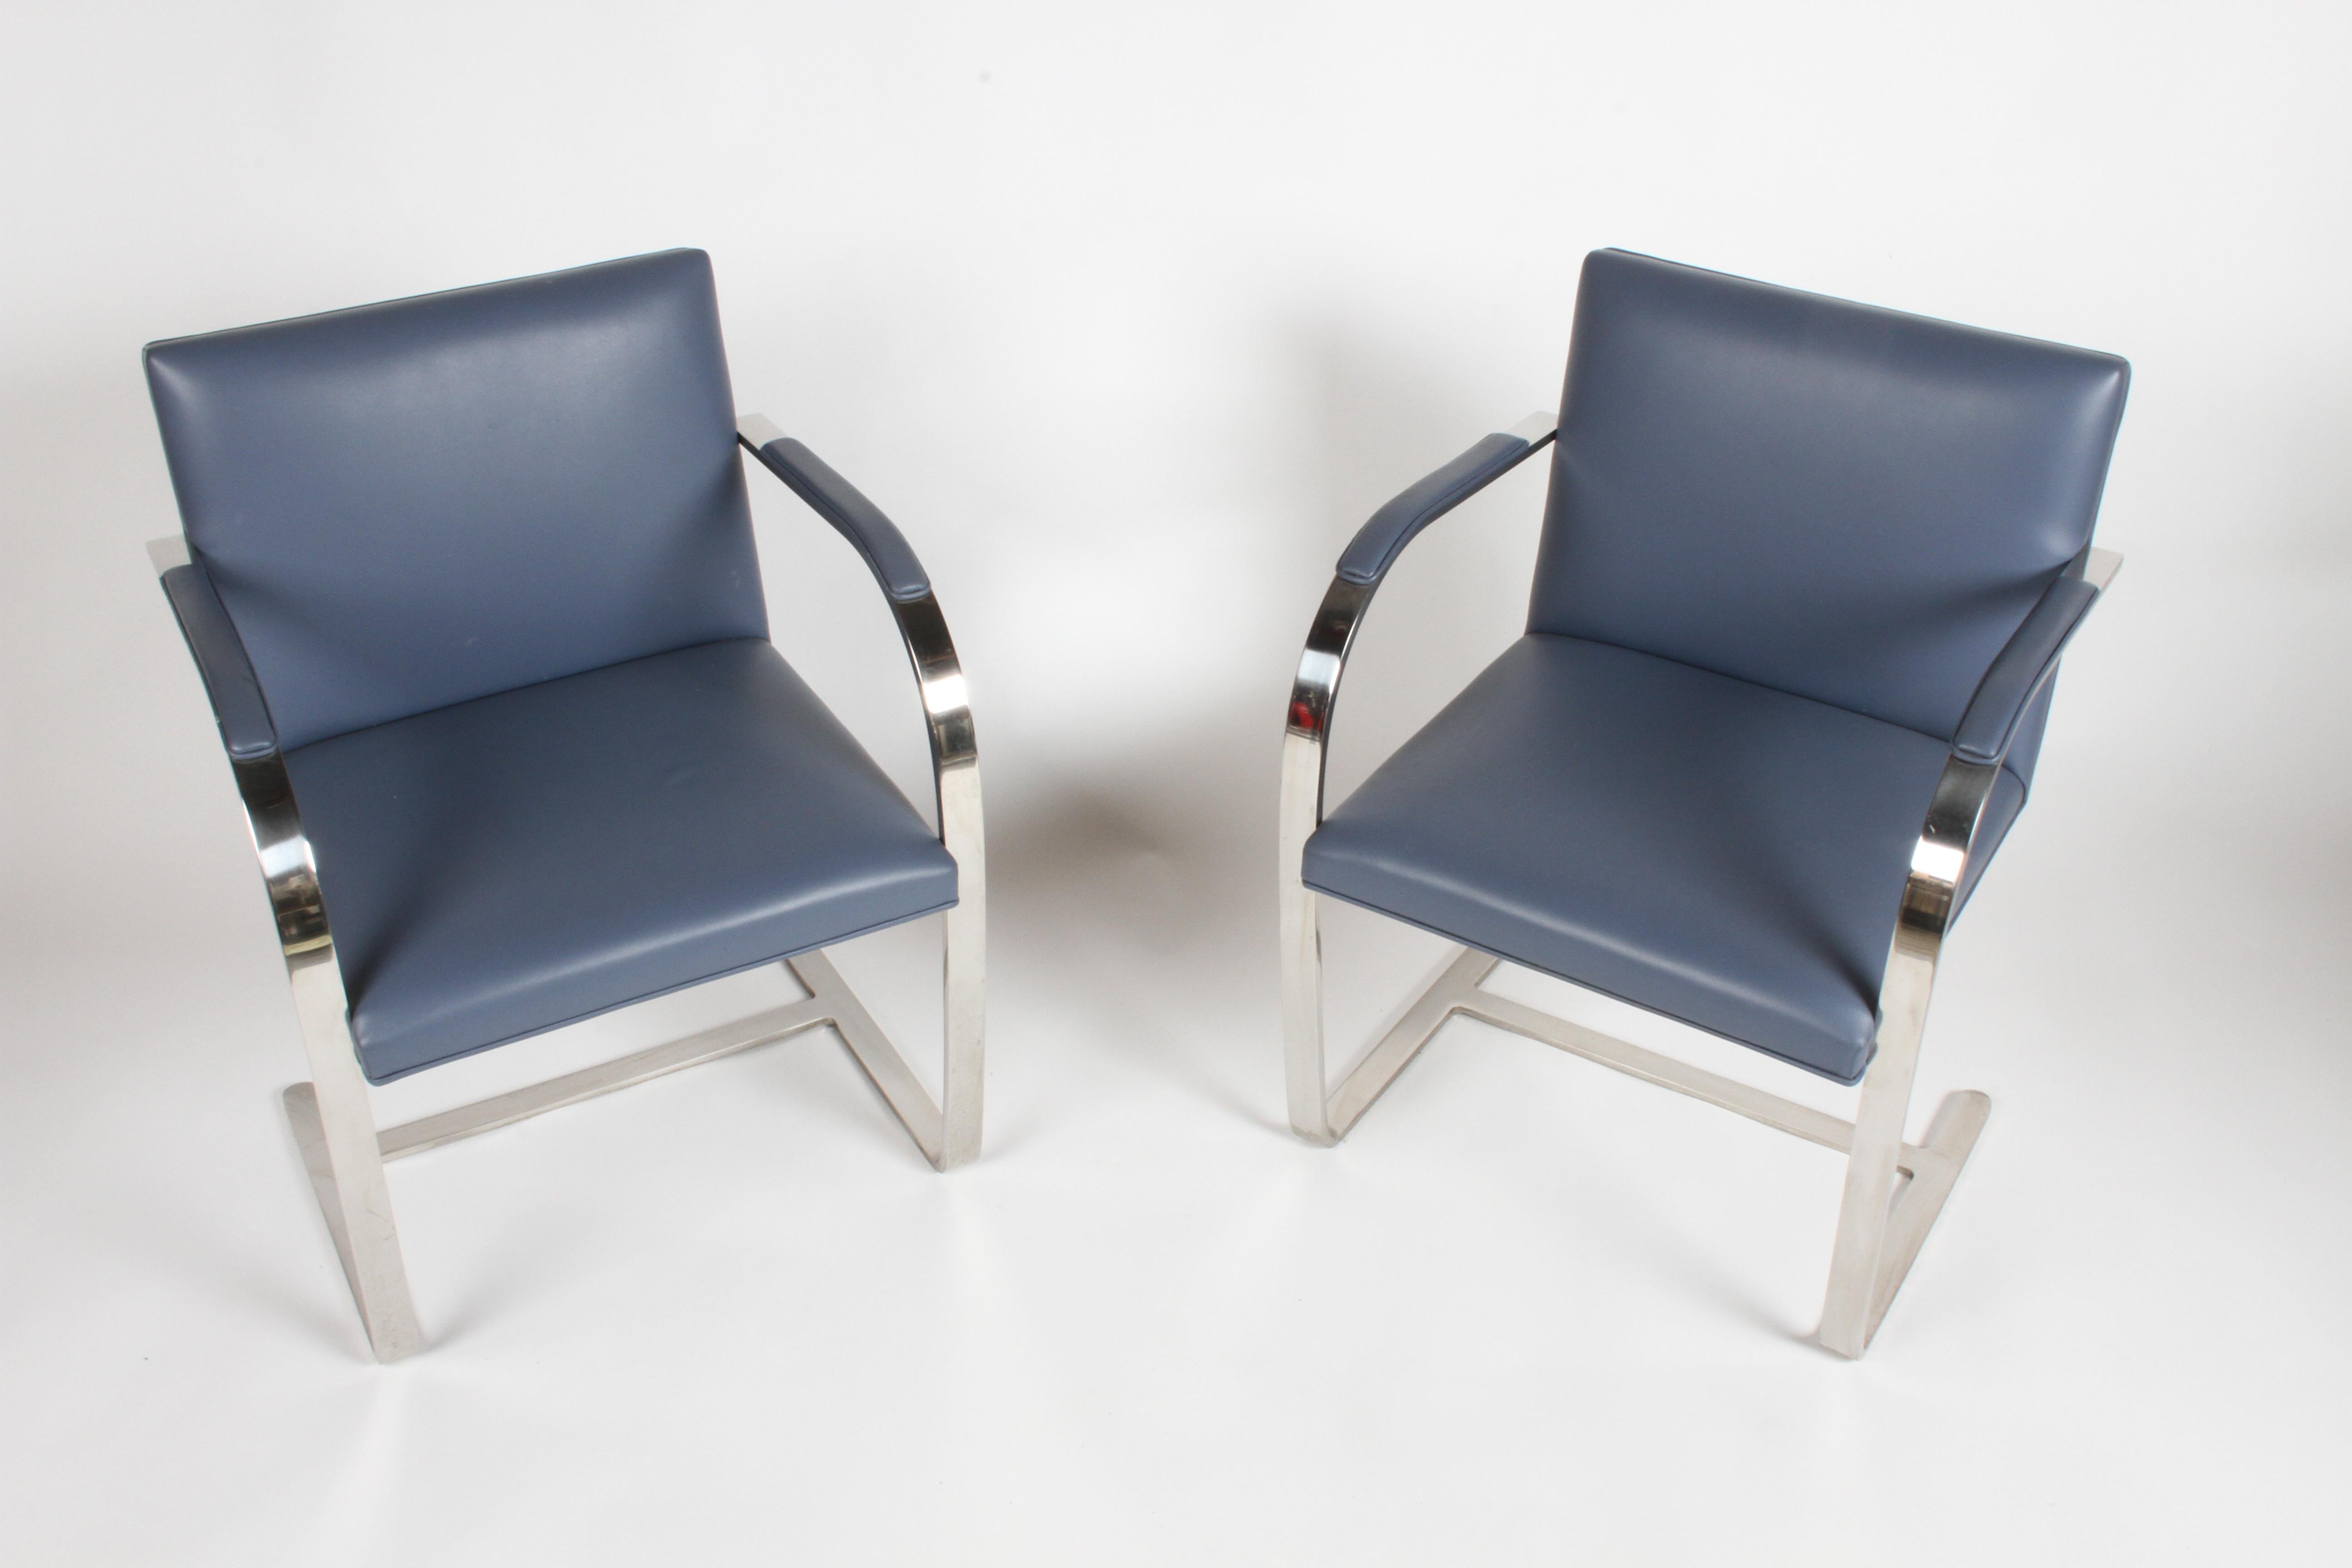 Pair of Mies van der Rohe flatbar Brno for Knoll in stainless steel with grey blue leather. In excellent condition marked with label. Only minor scuff to leather see photo. Production year 2000.

 (Also have three in black leather, the leather